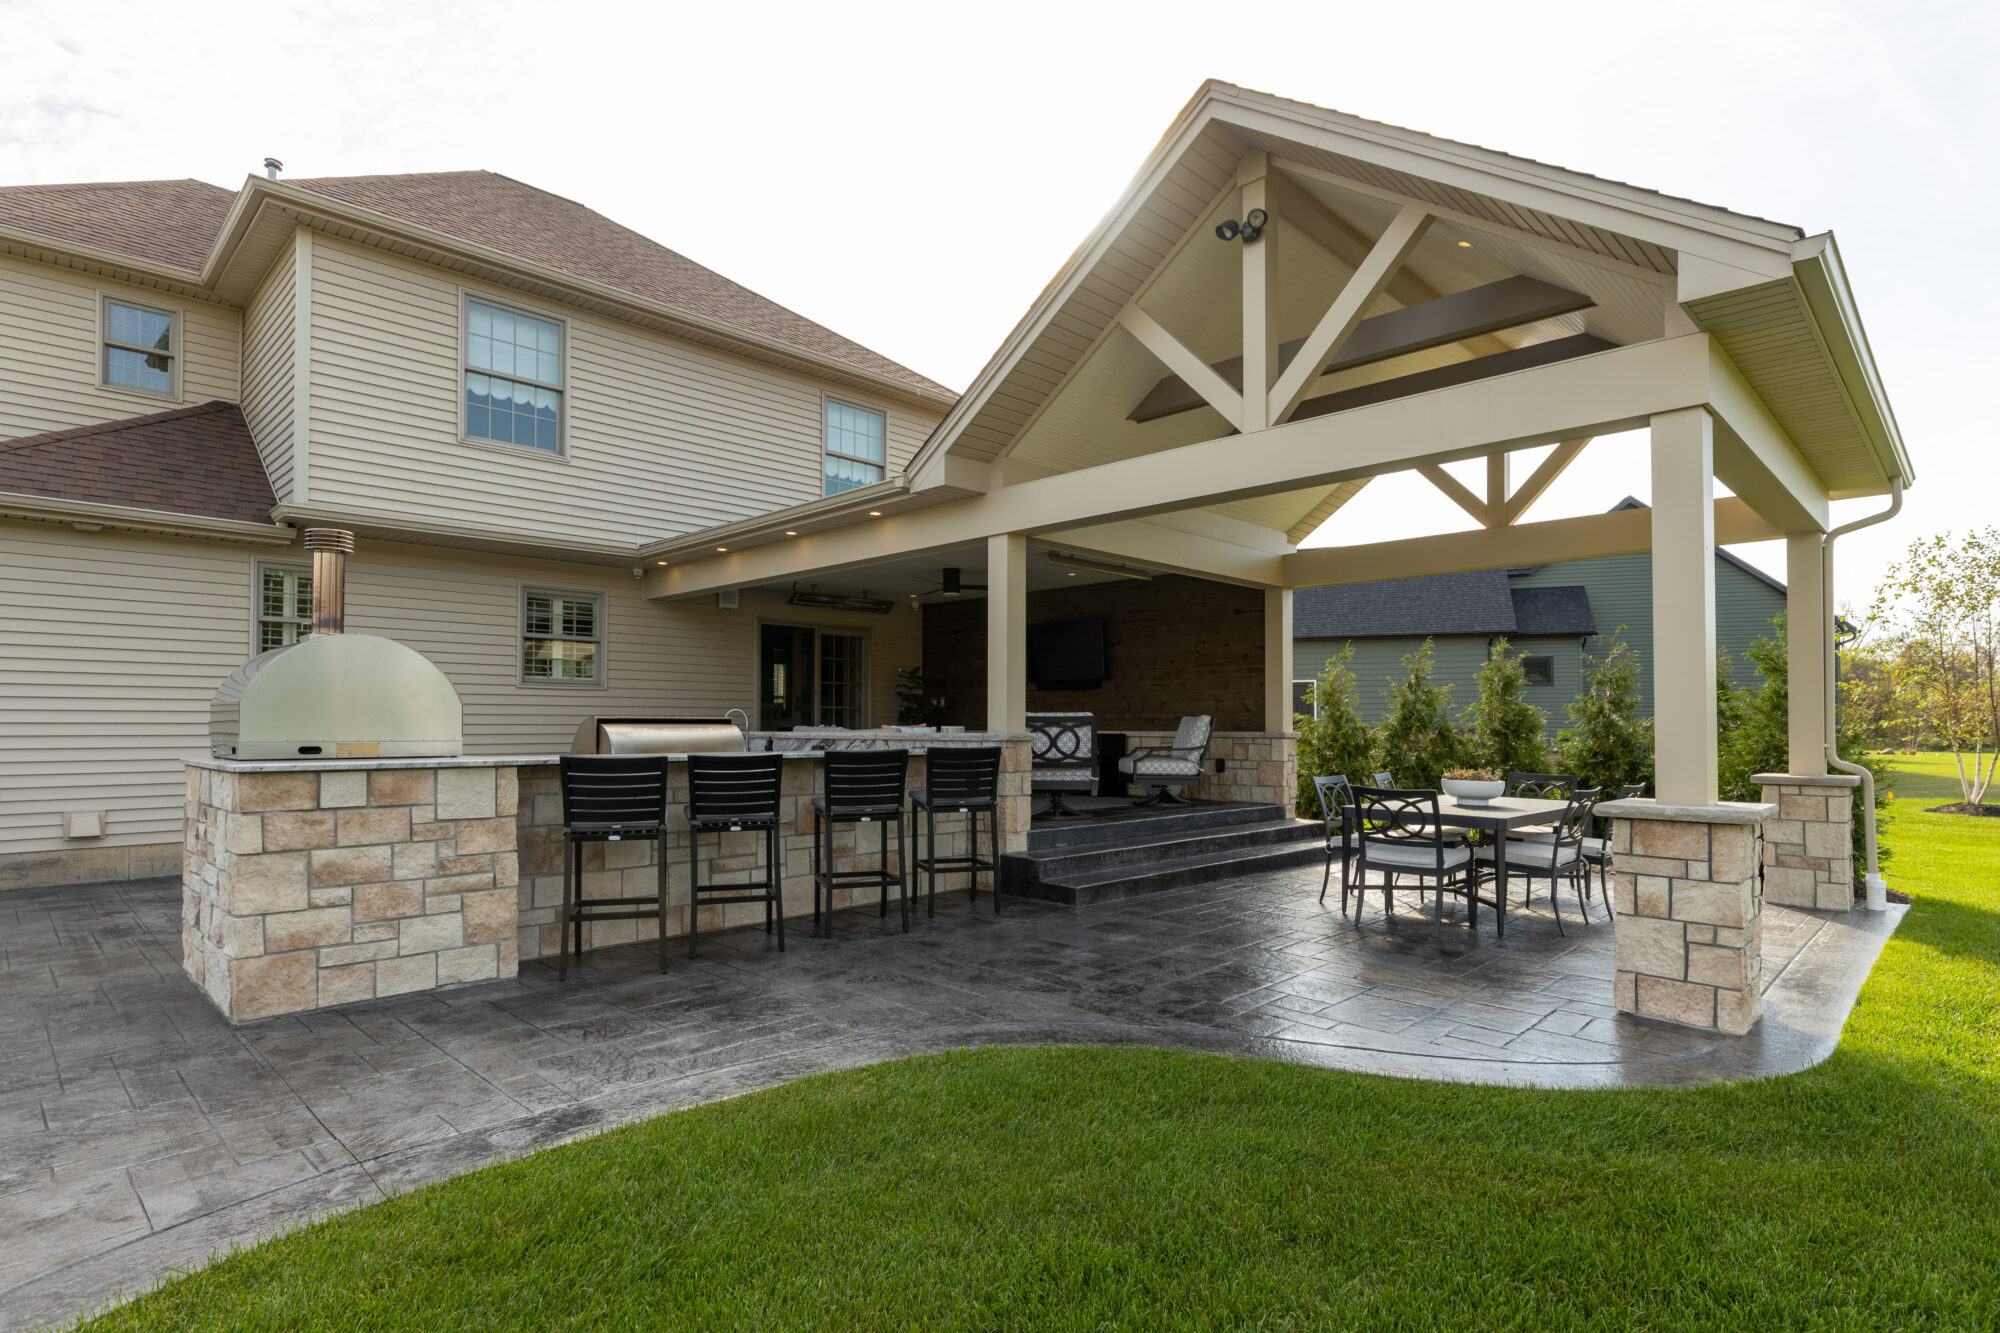 An inviting and beautifully designed outdoor covered patio area featuring a stainless steel grill, stylish bar seating with comfortable cushions, a modern built-in oven, and a cozy round fire pit with surrounding chairs, showcasing R.E. McNamara Inc.'s expertise in residential renovation.